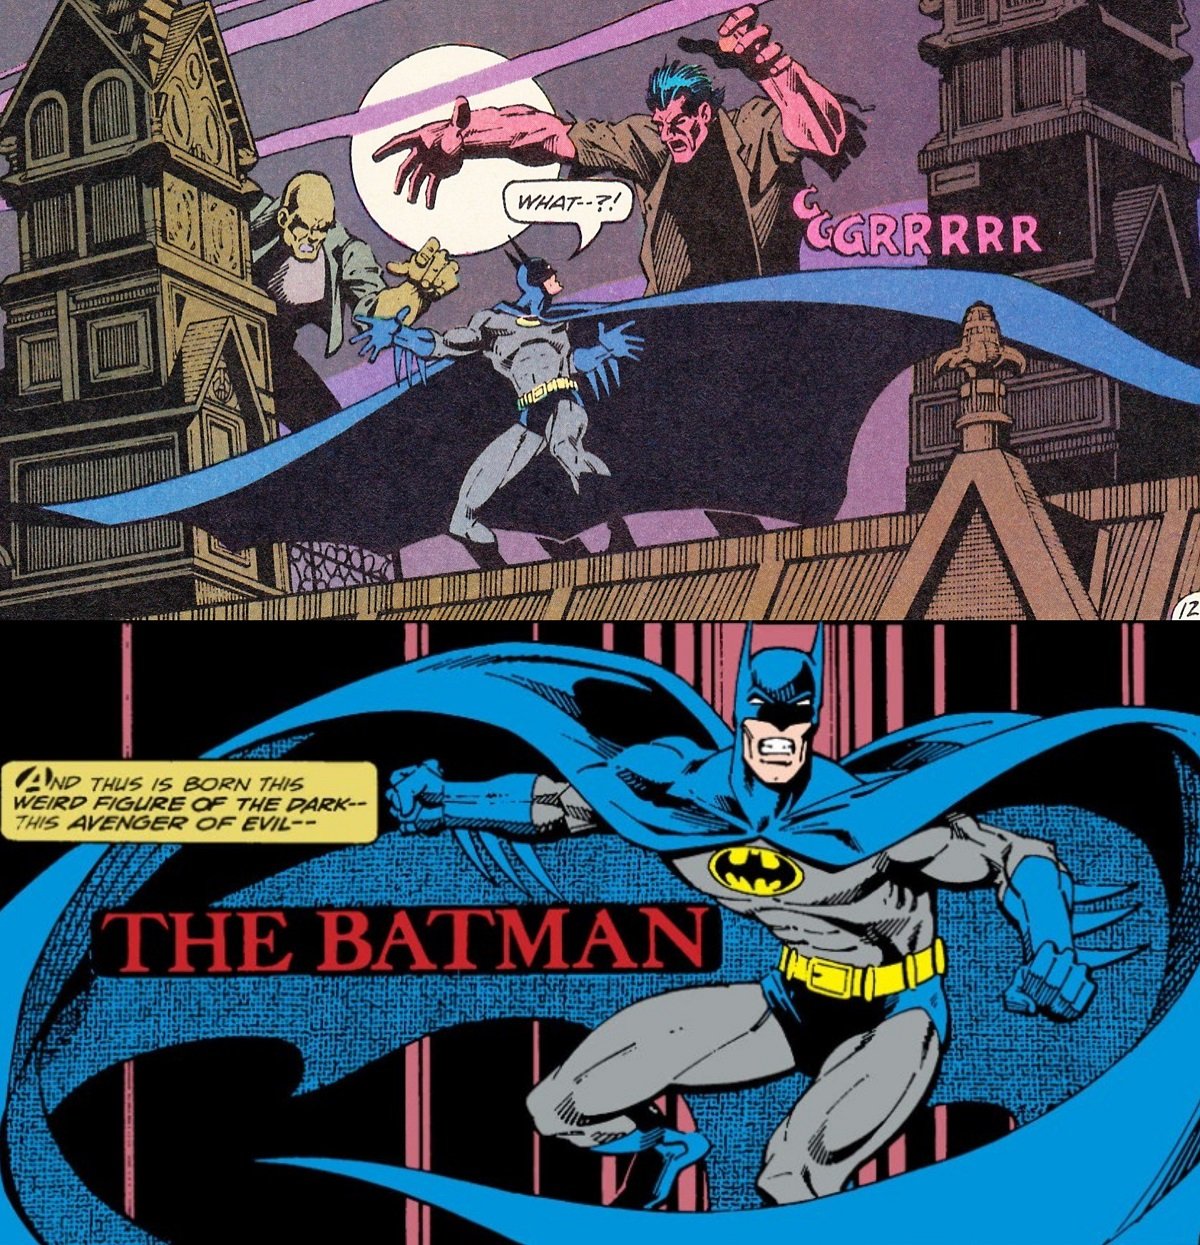 Batman art by Marshall Rogers, from his brief run on Detective Comics in 1977-78. This is one of the best Batman comic runs.